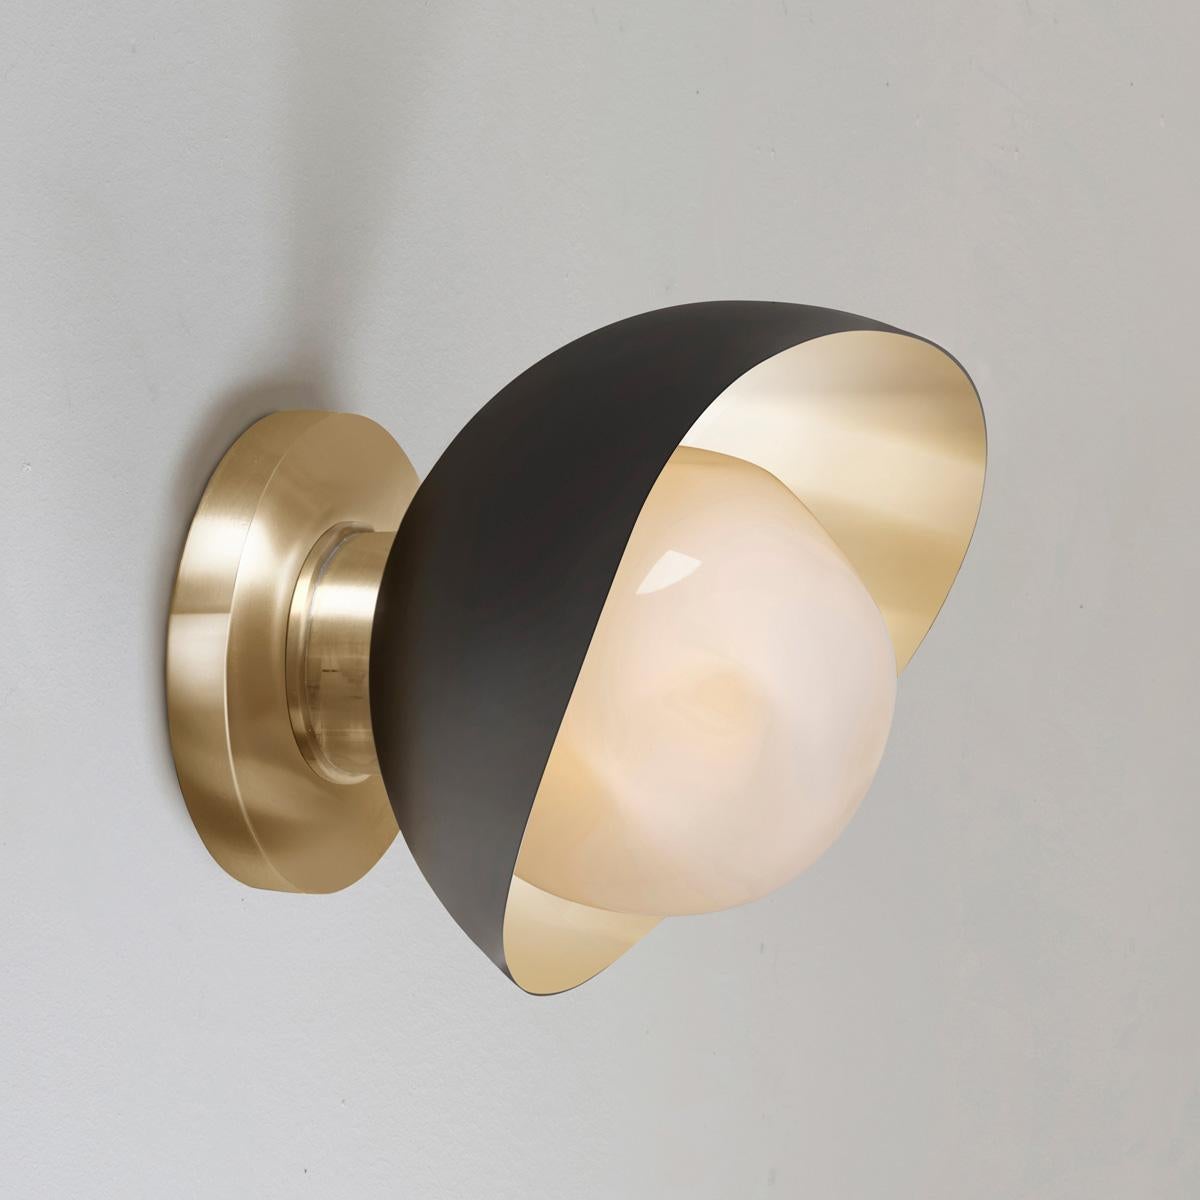 Perla Mini Wall Light by Gaspare Asaro. Sand White and Satin Brass Finish In New Condition For Sale In New York, NY